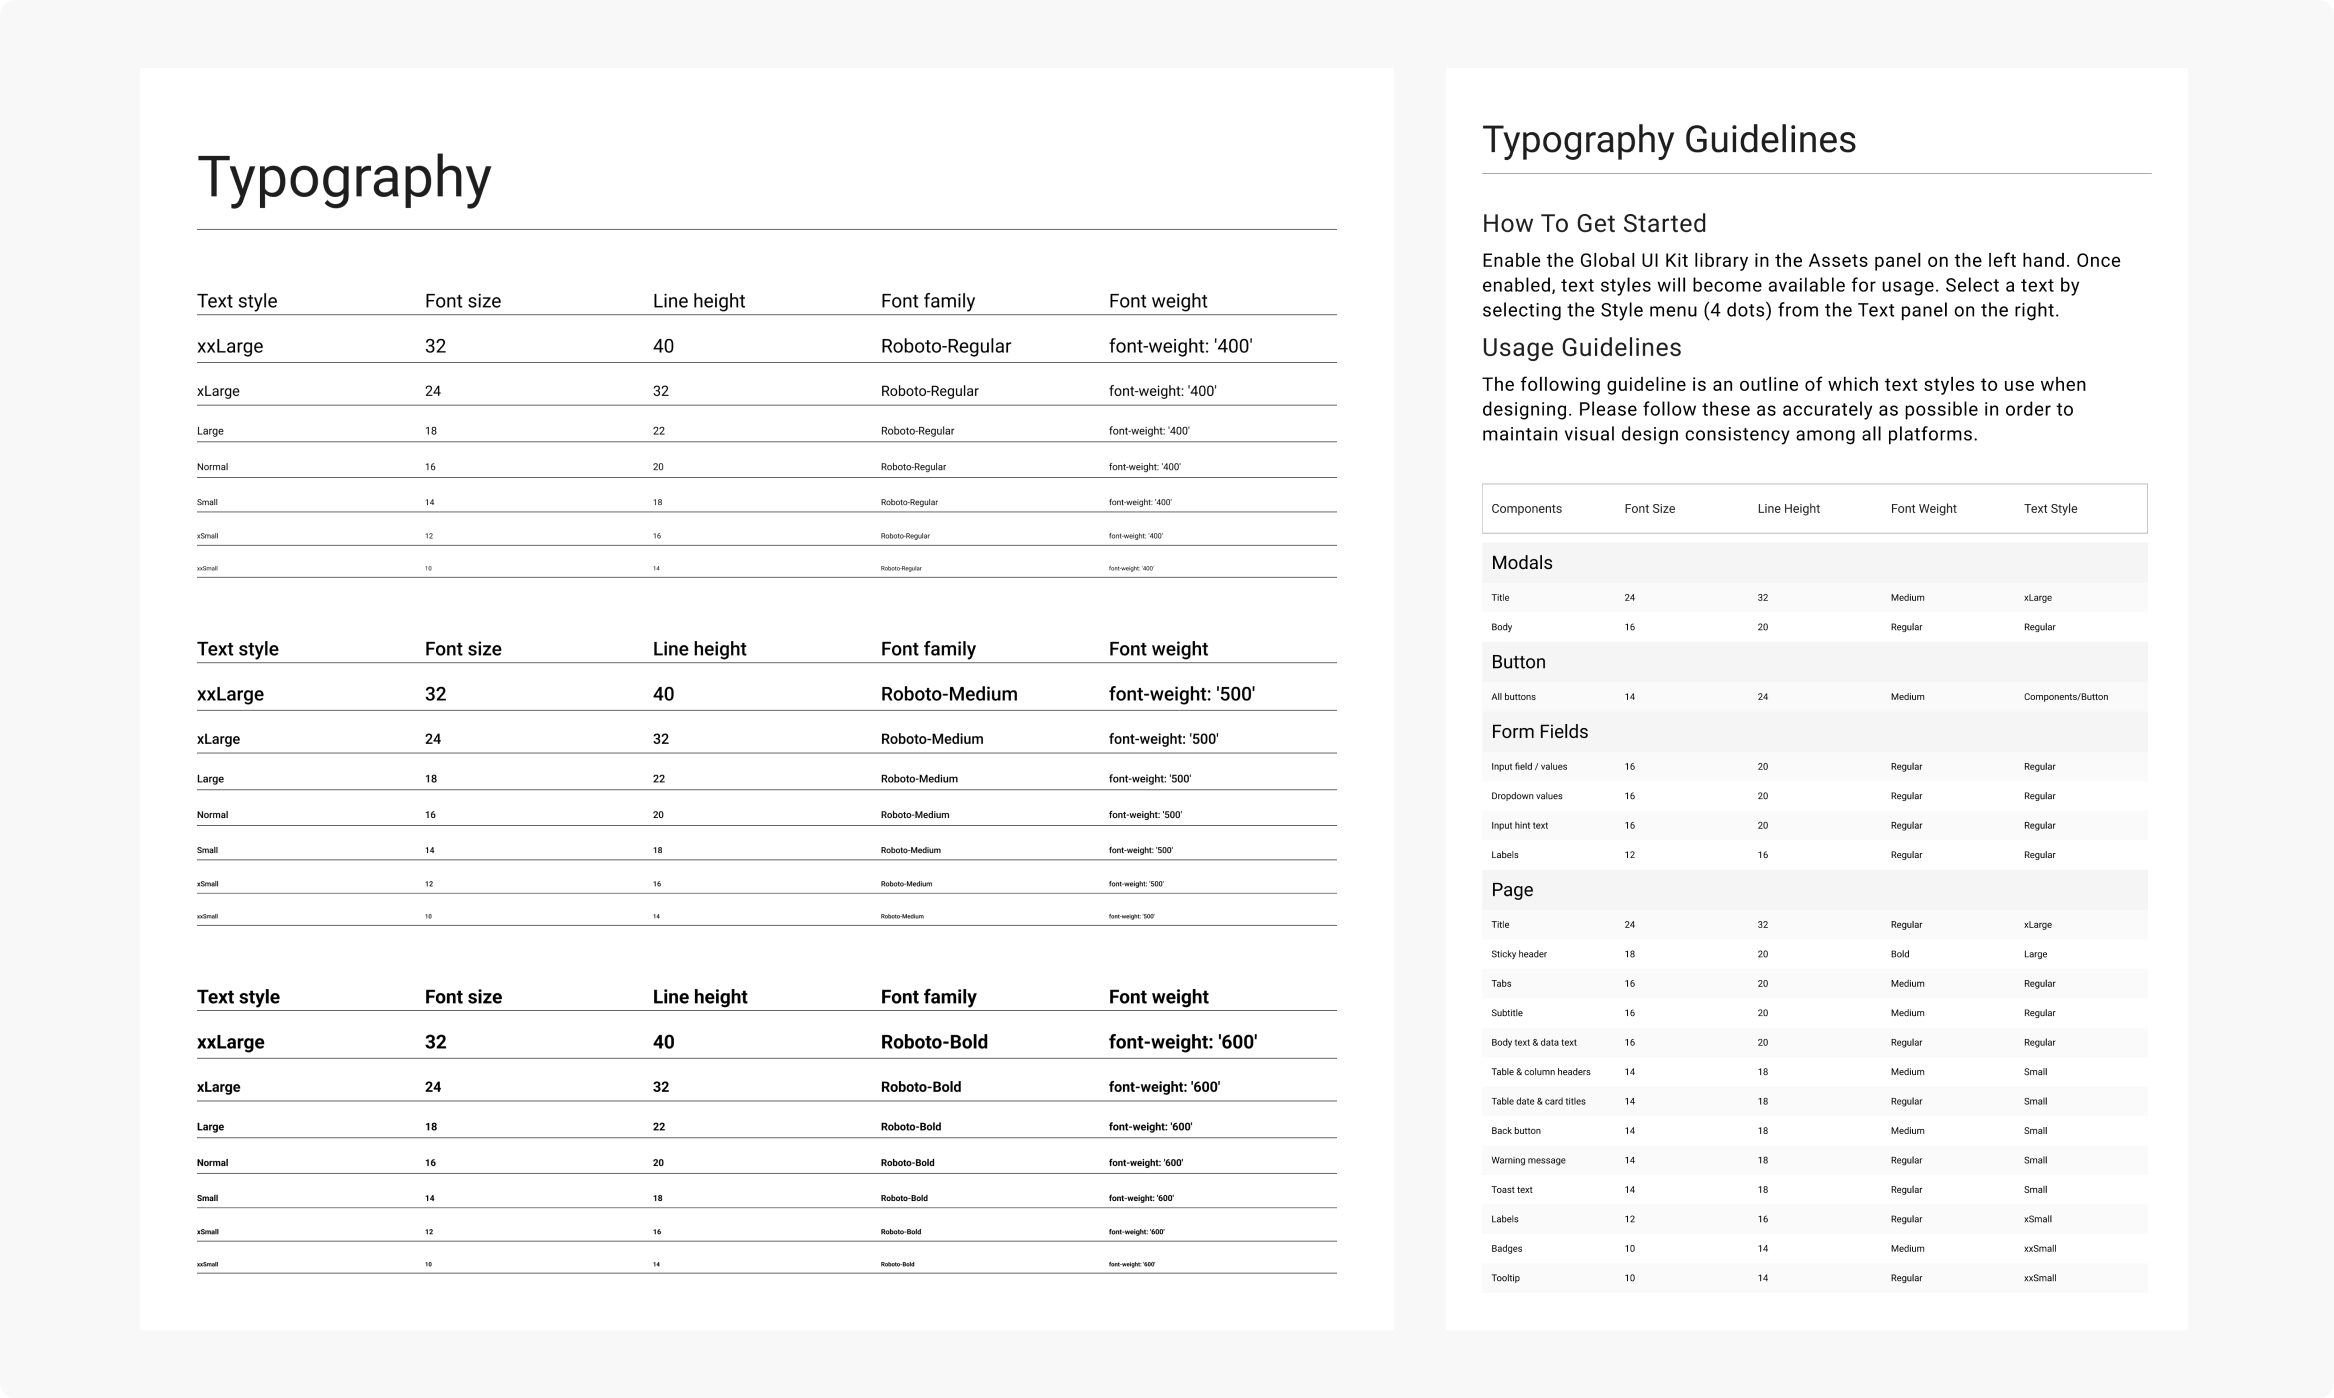 Documentation of typography styles and guidelines.